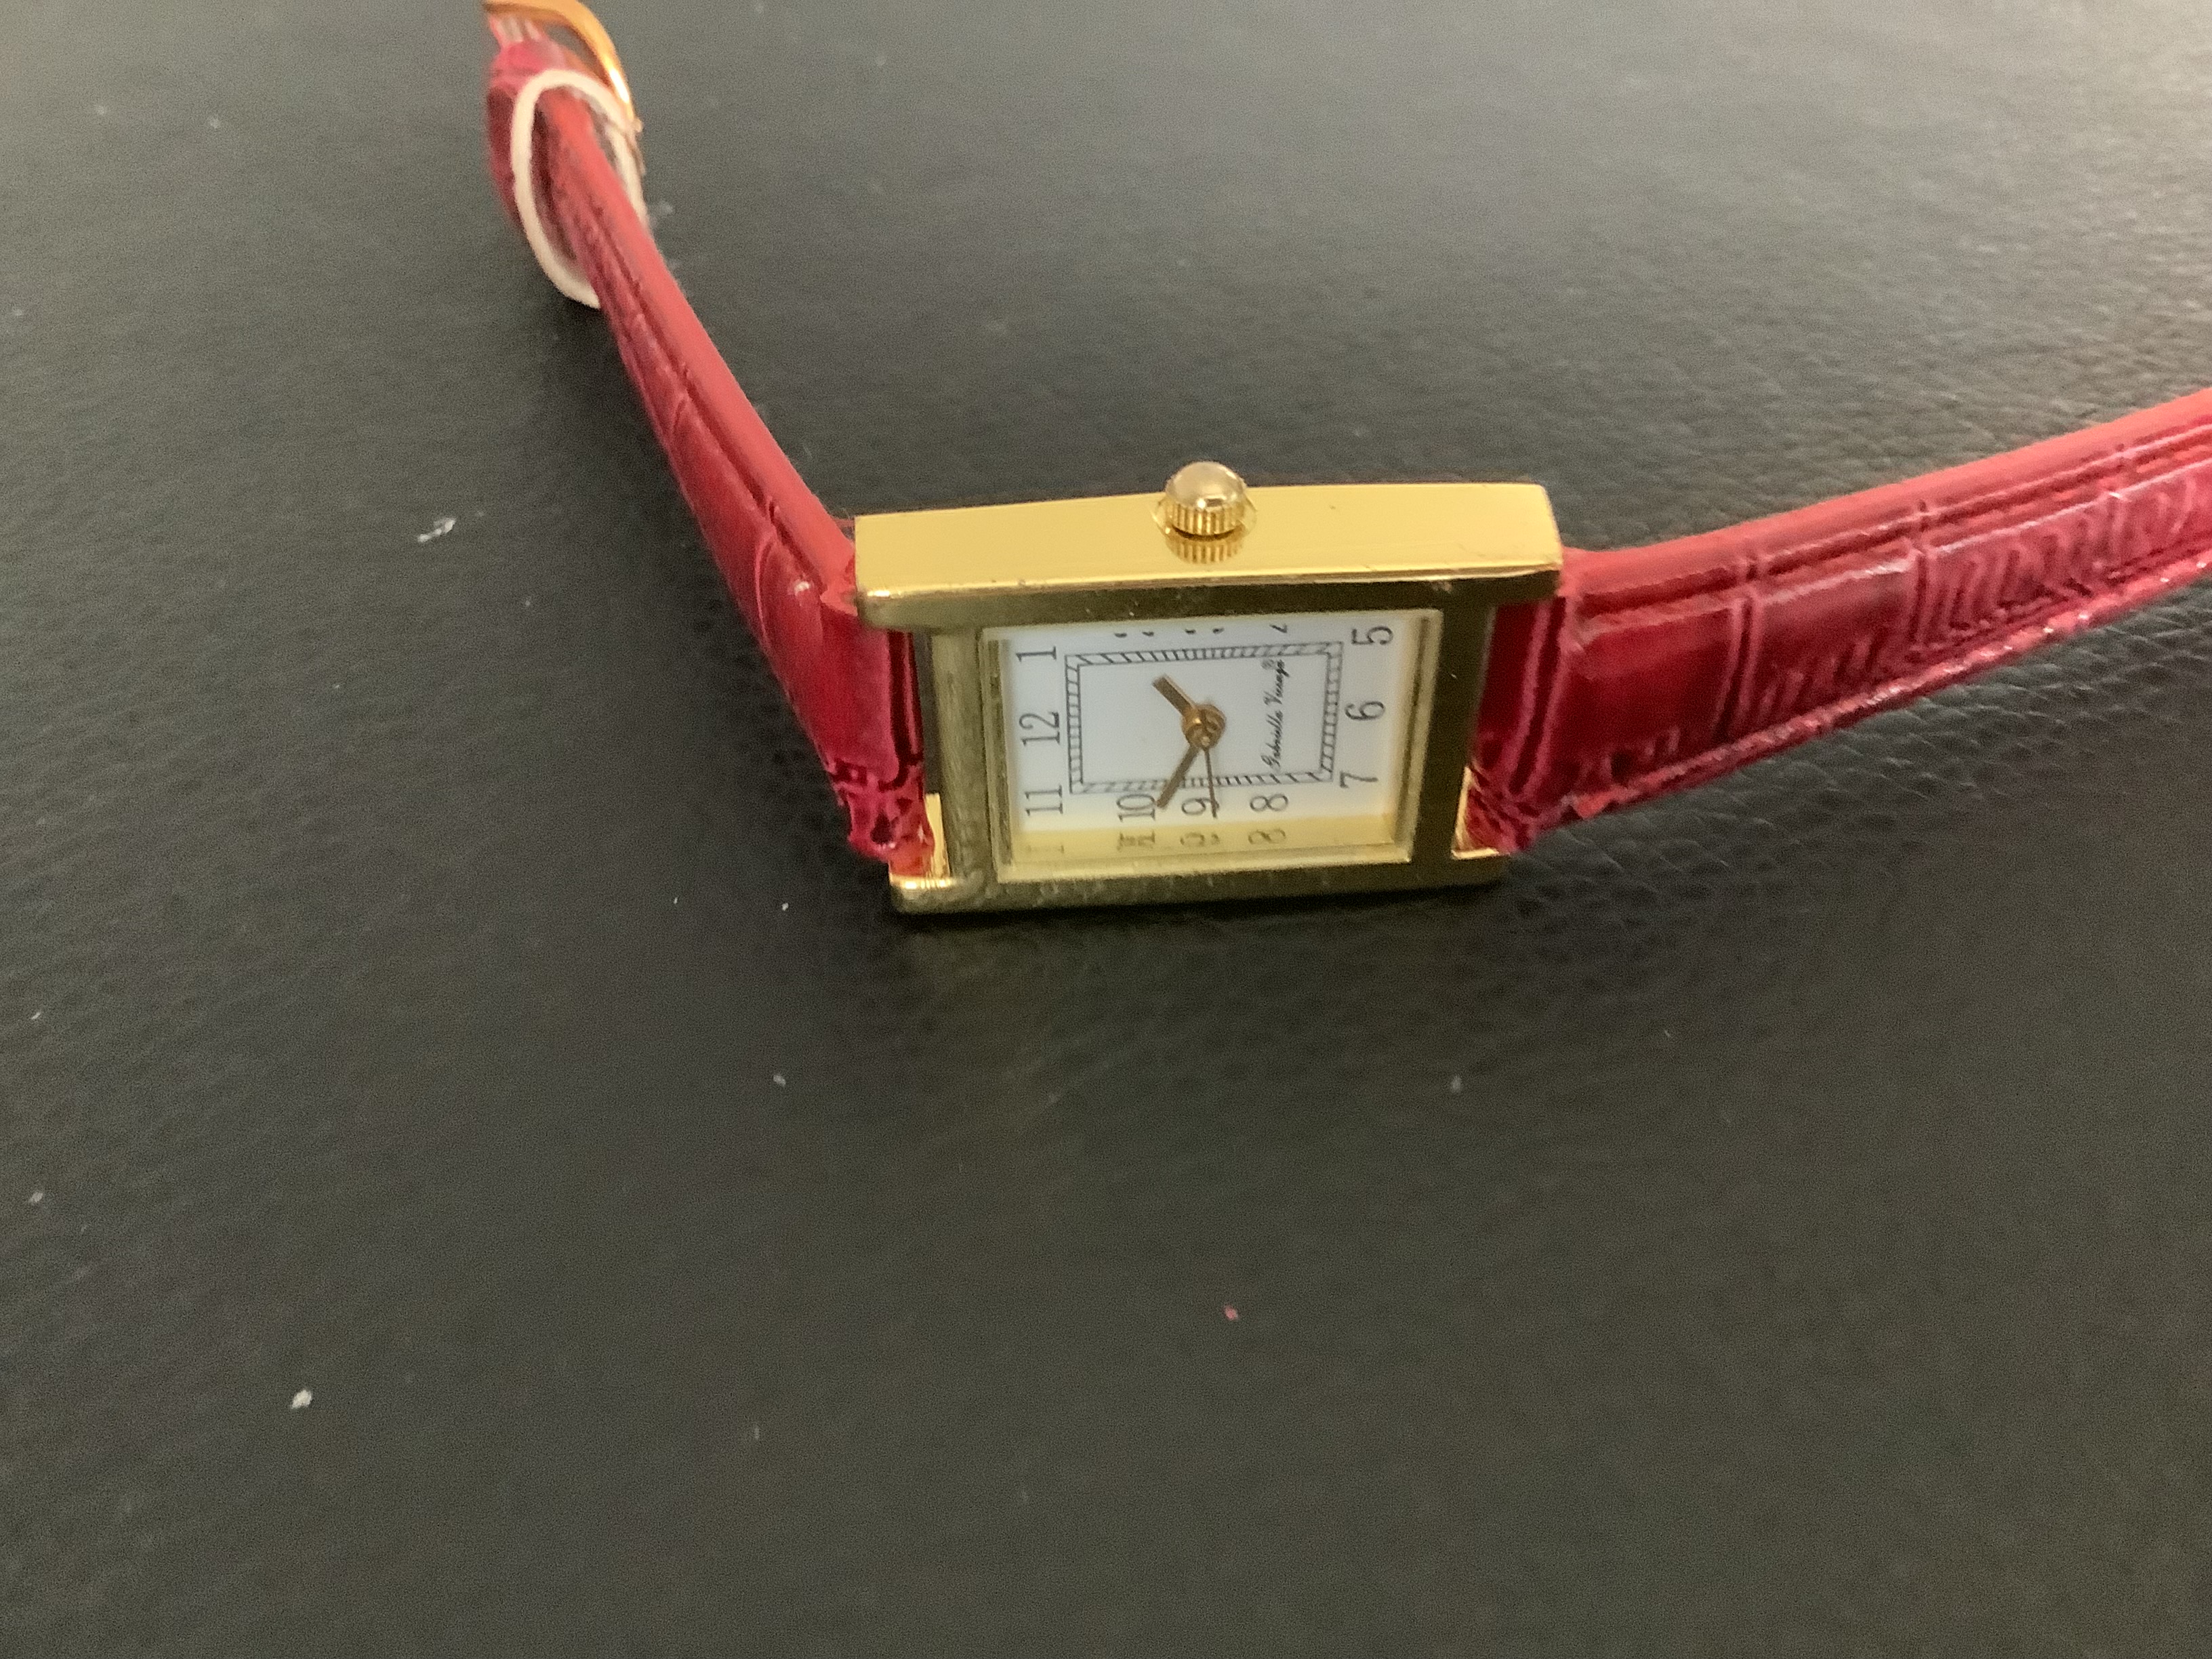 Lovely Gold Plated Gabriella Vicenza Ladies wristwatch with Red Leather Strap (GS 175) - Image 2 of 5